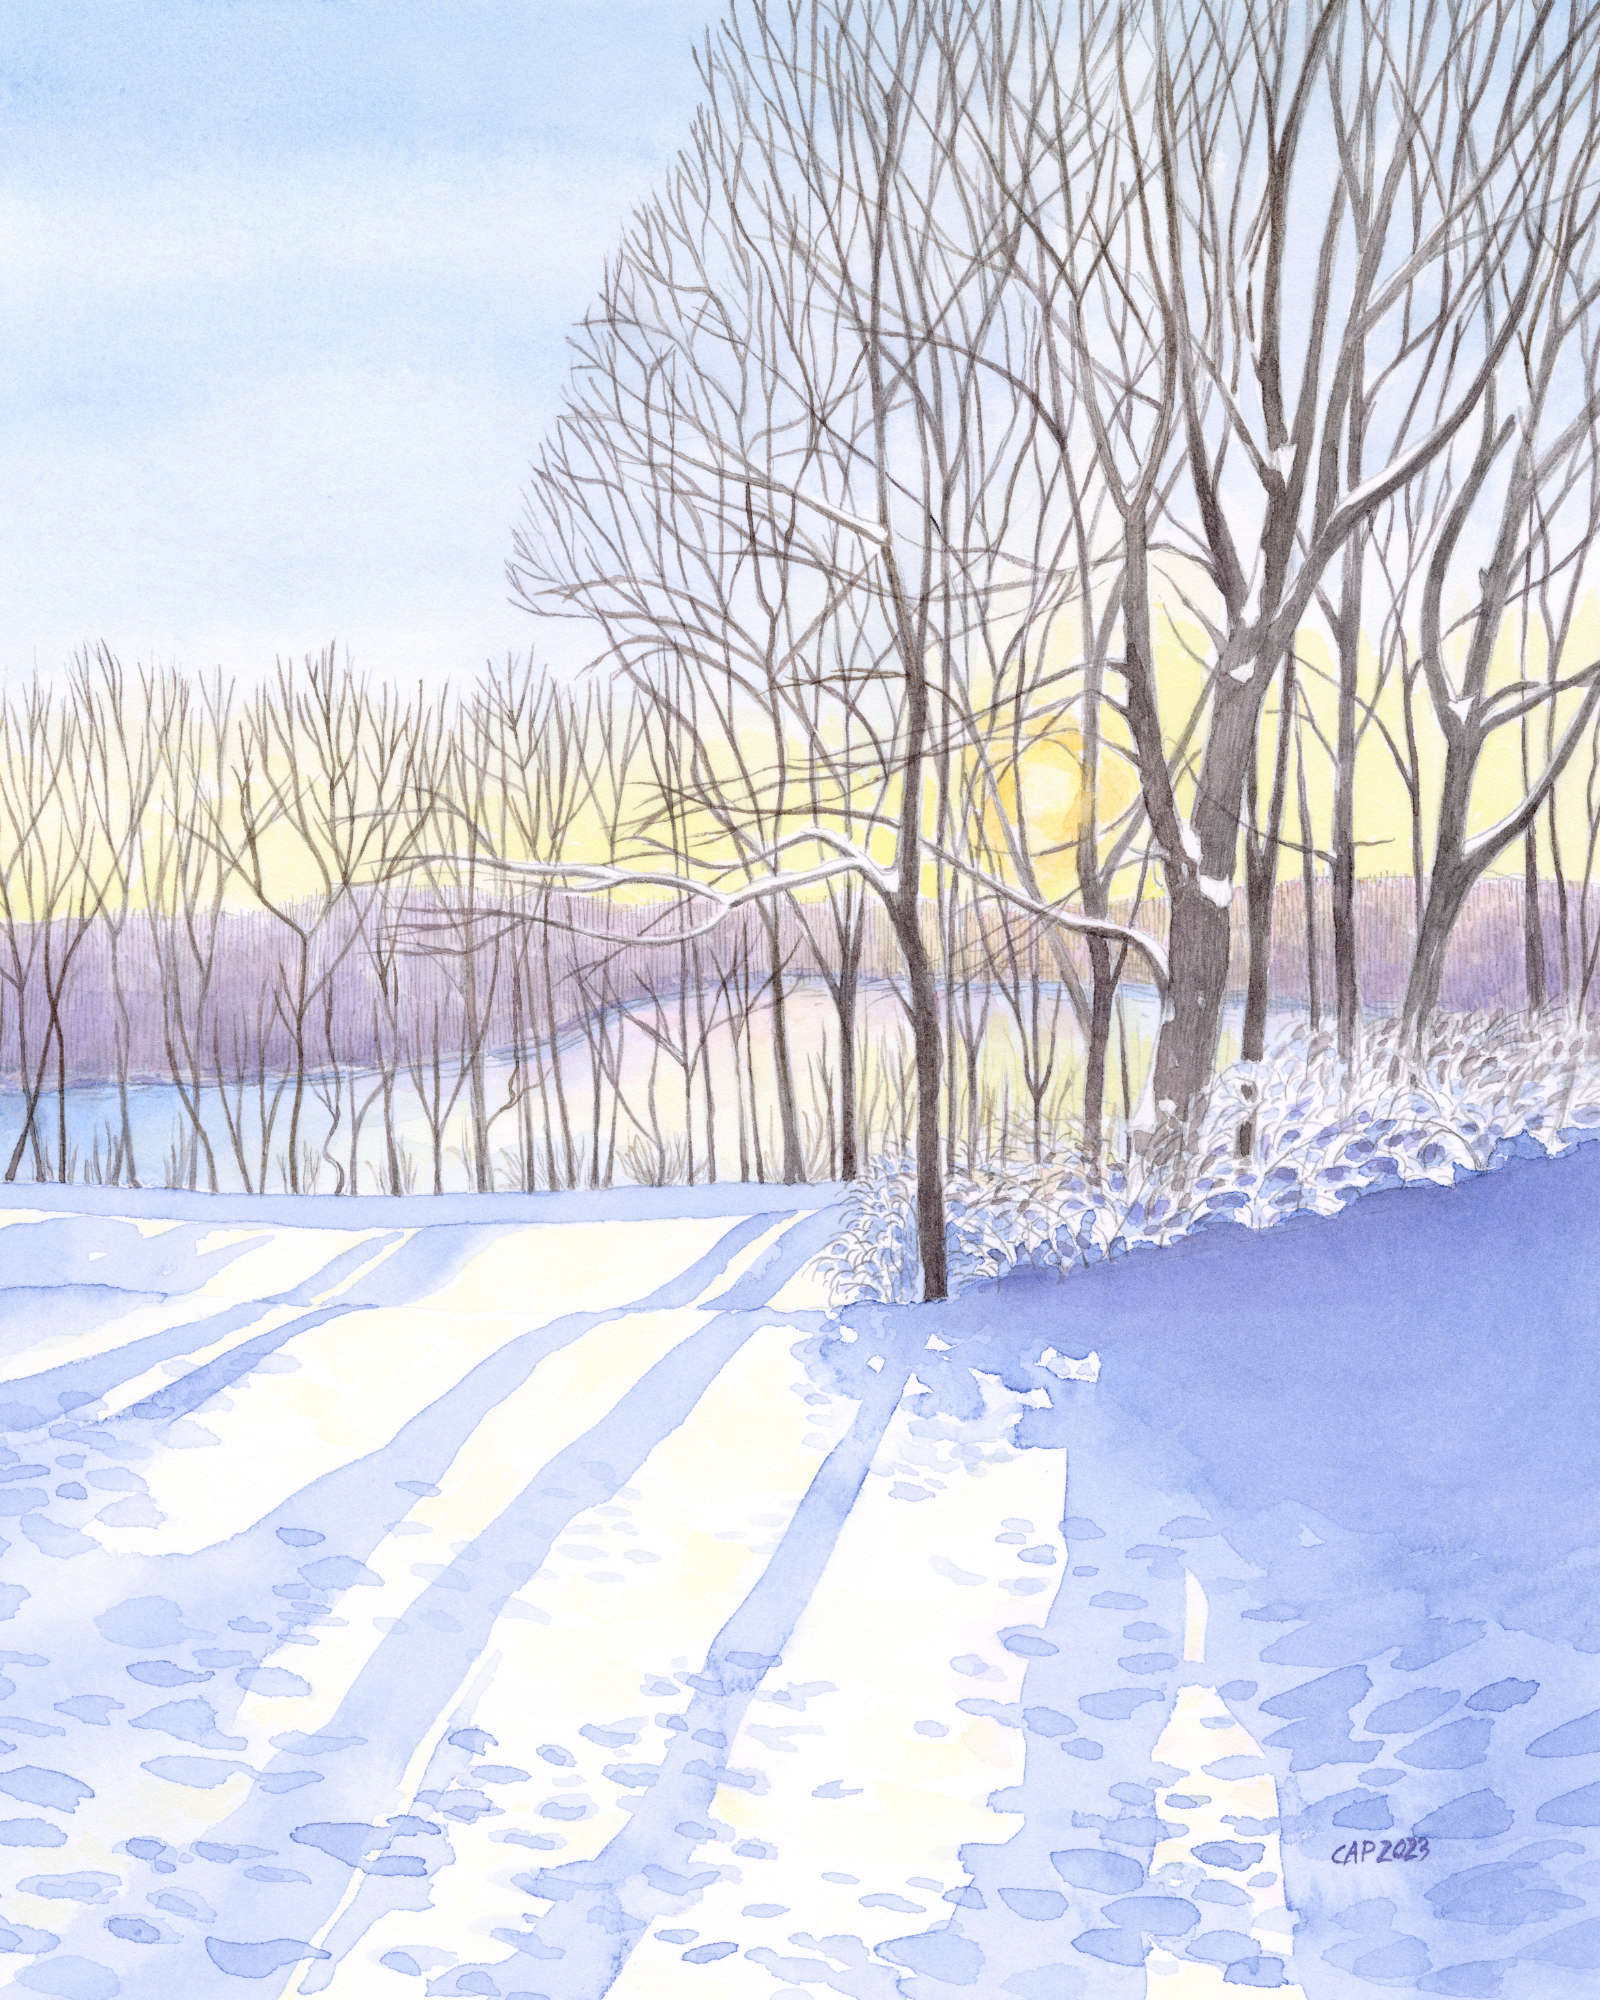 Winter landscape watercolor painting of bare trees with the sun peeking through at sunrise